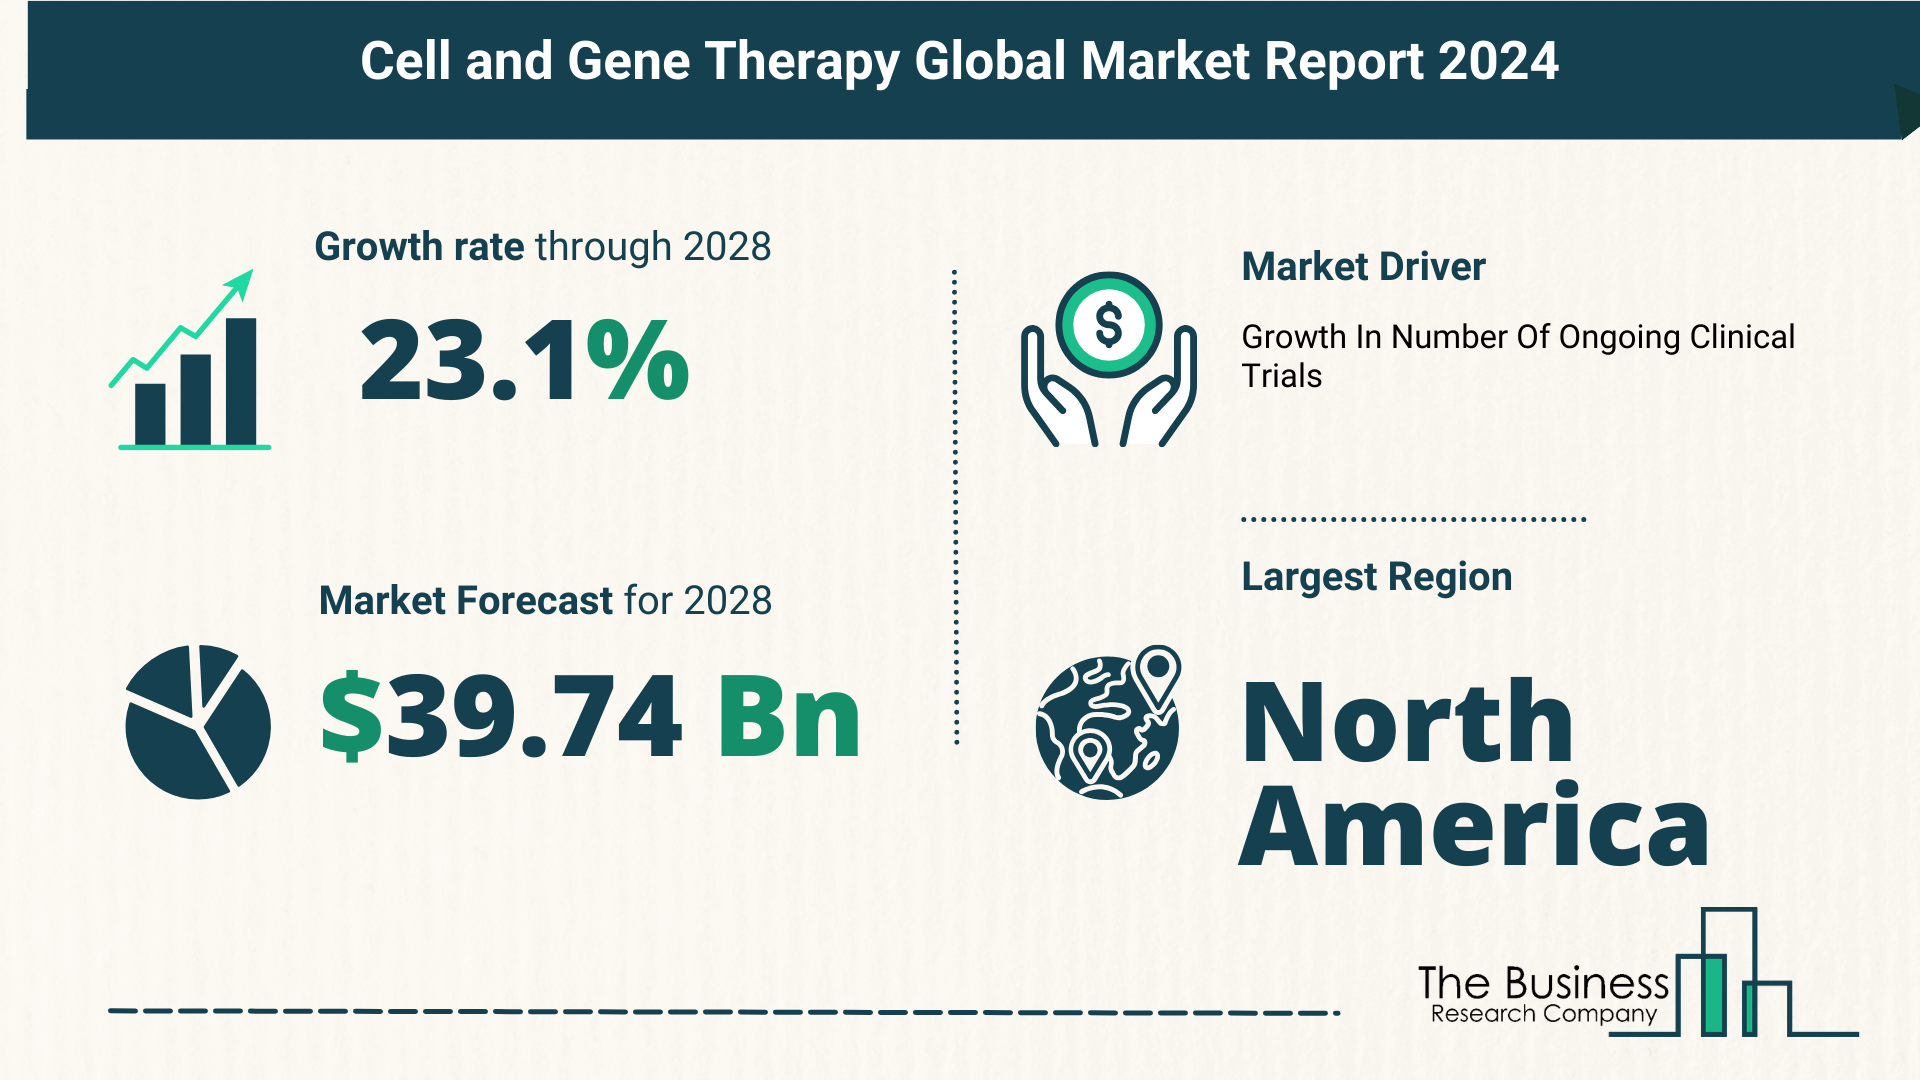 Top 5 Insights From The Cell and Gene Therapy Market Report 2024